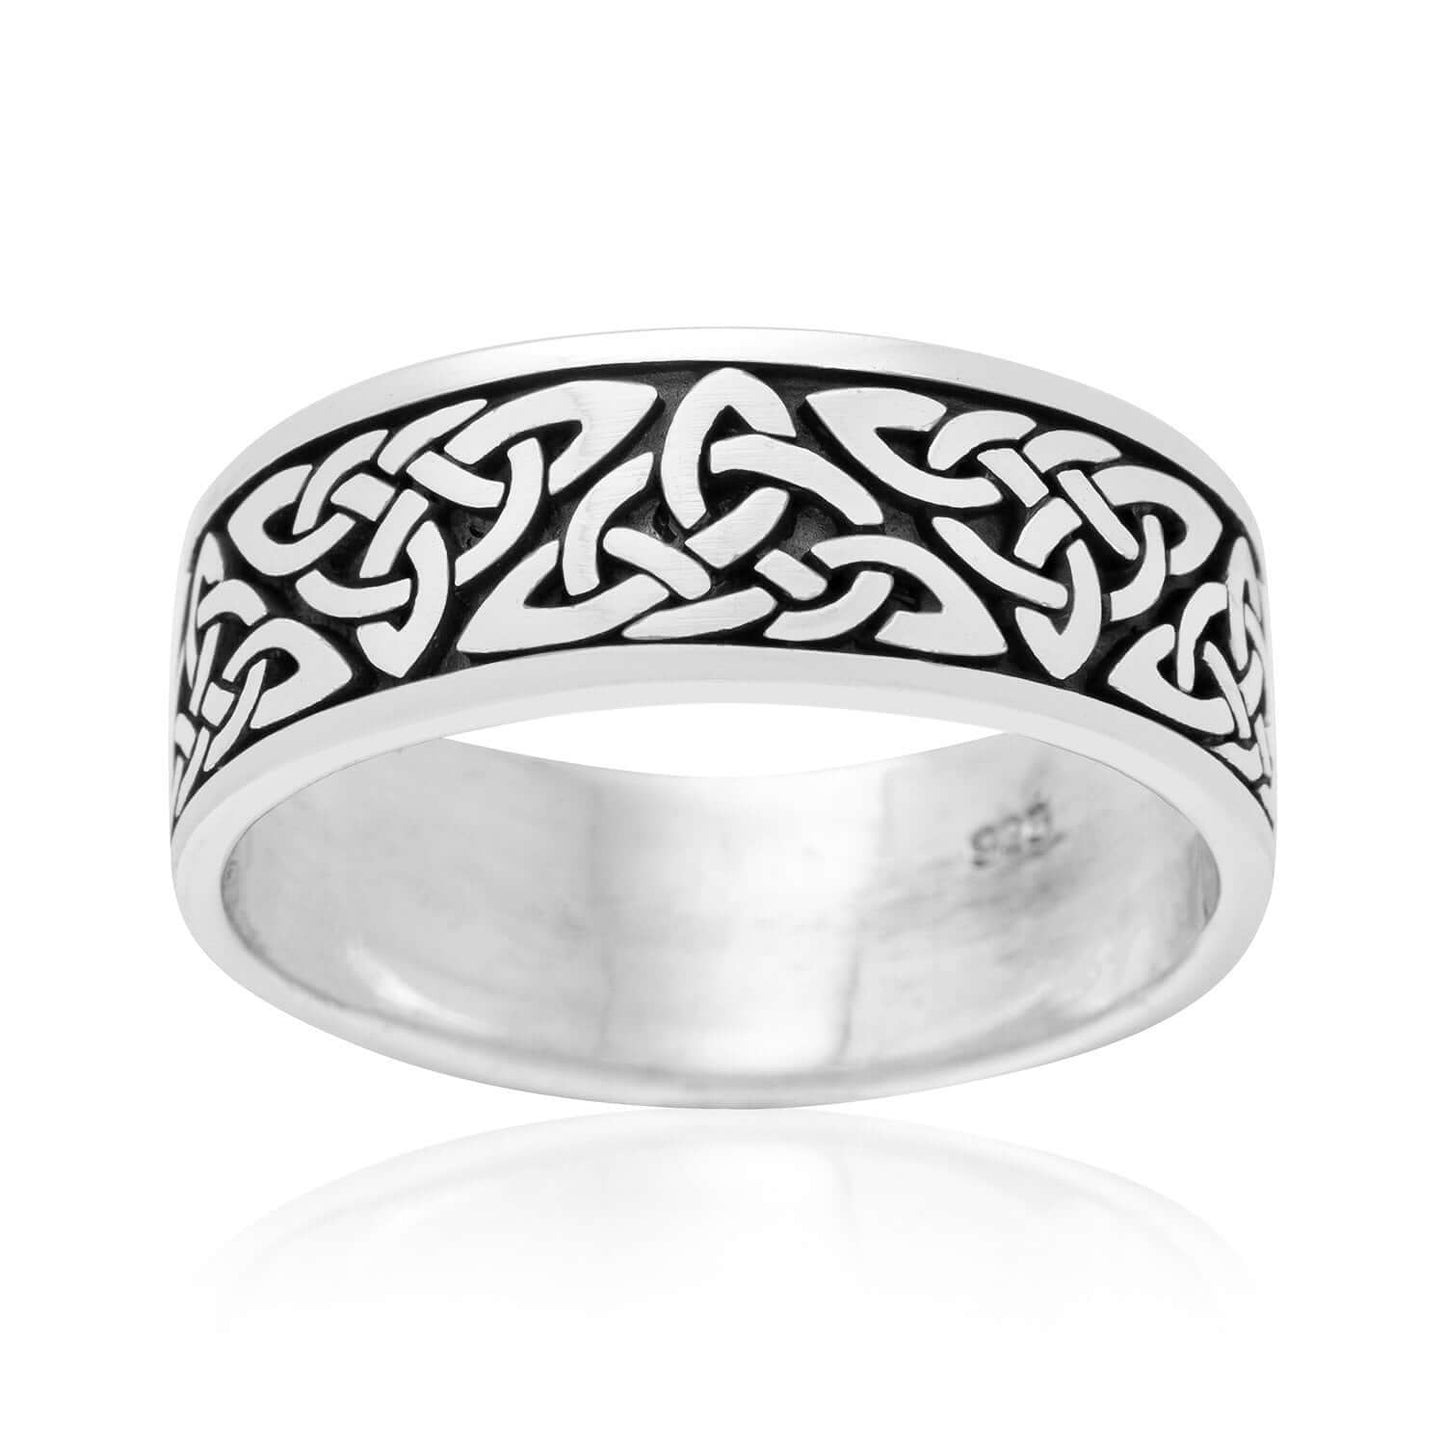 Sterling Silver Celtic Triquetra Knot Band Ring - SilverMania925